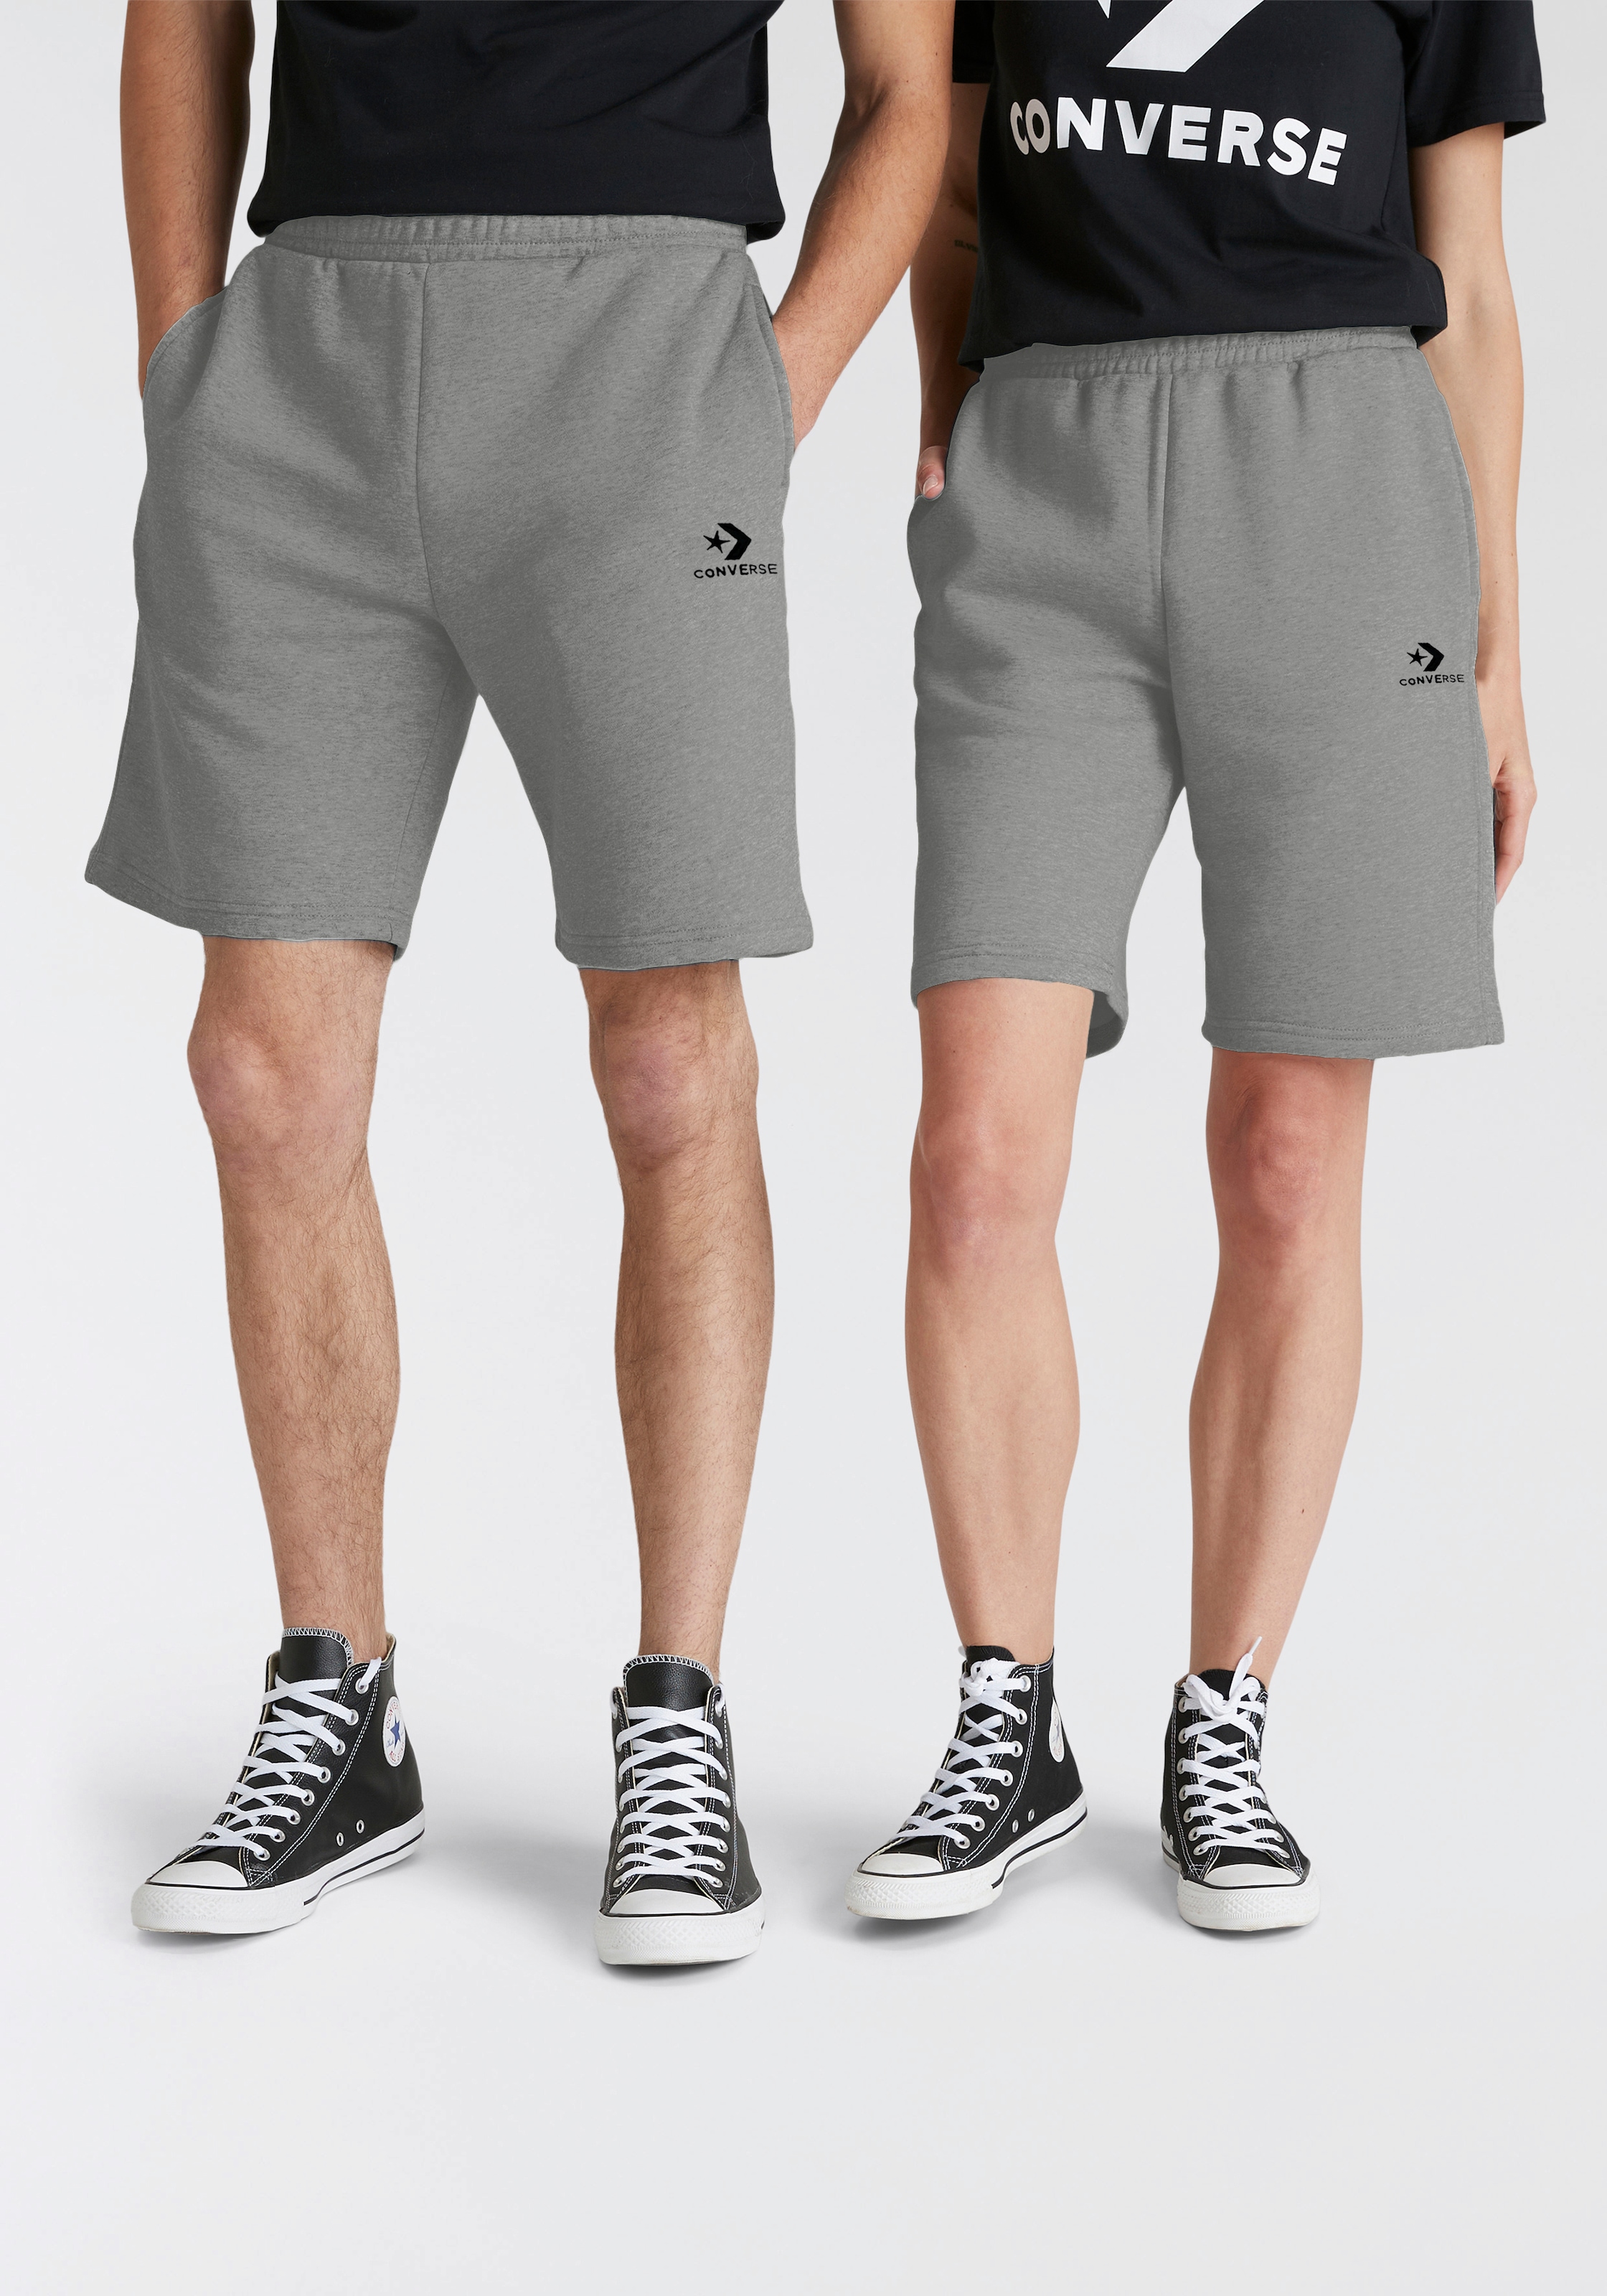 Converse Sweatshorts CHE«, bei GO-TO »CONVERSE EMBROIDERED tlg.) ♕ STAR (1